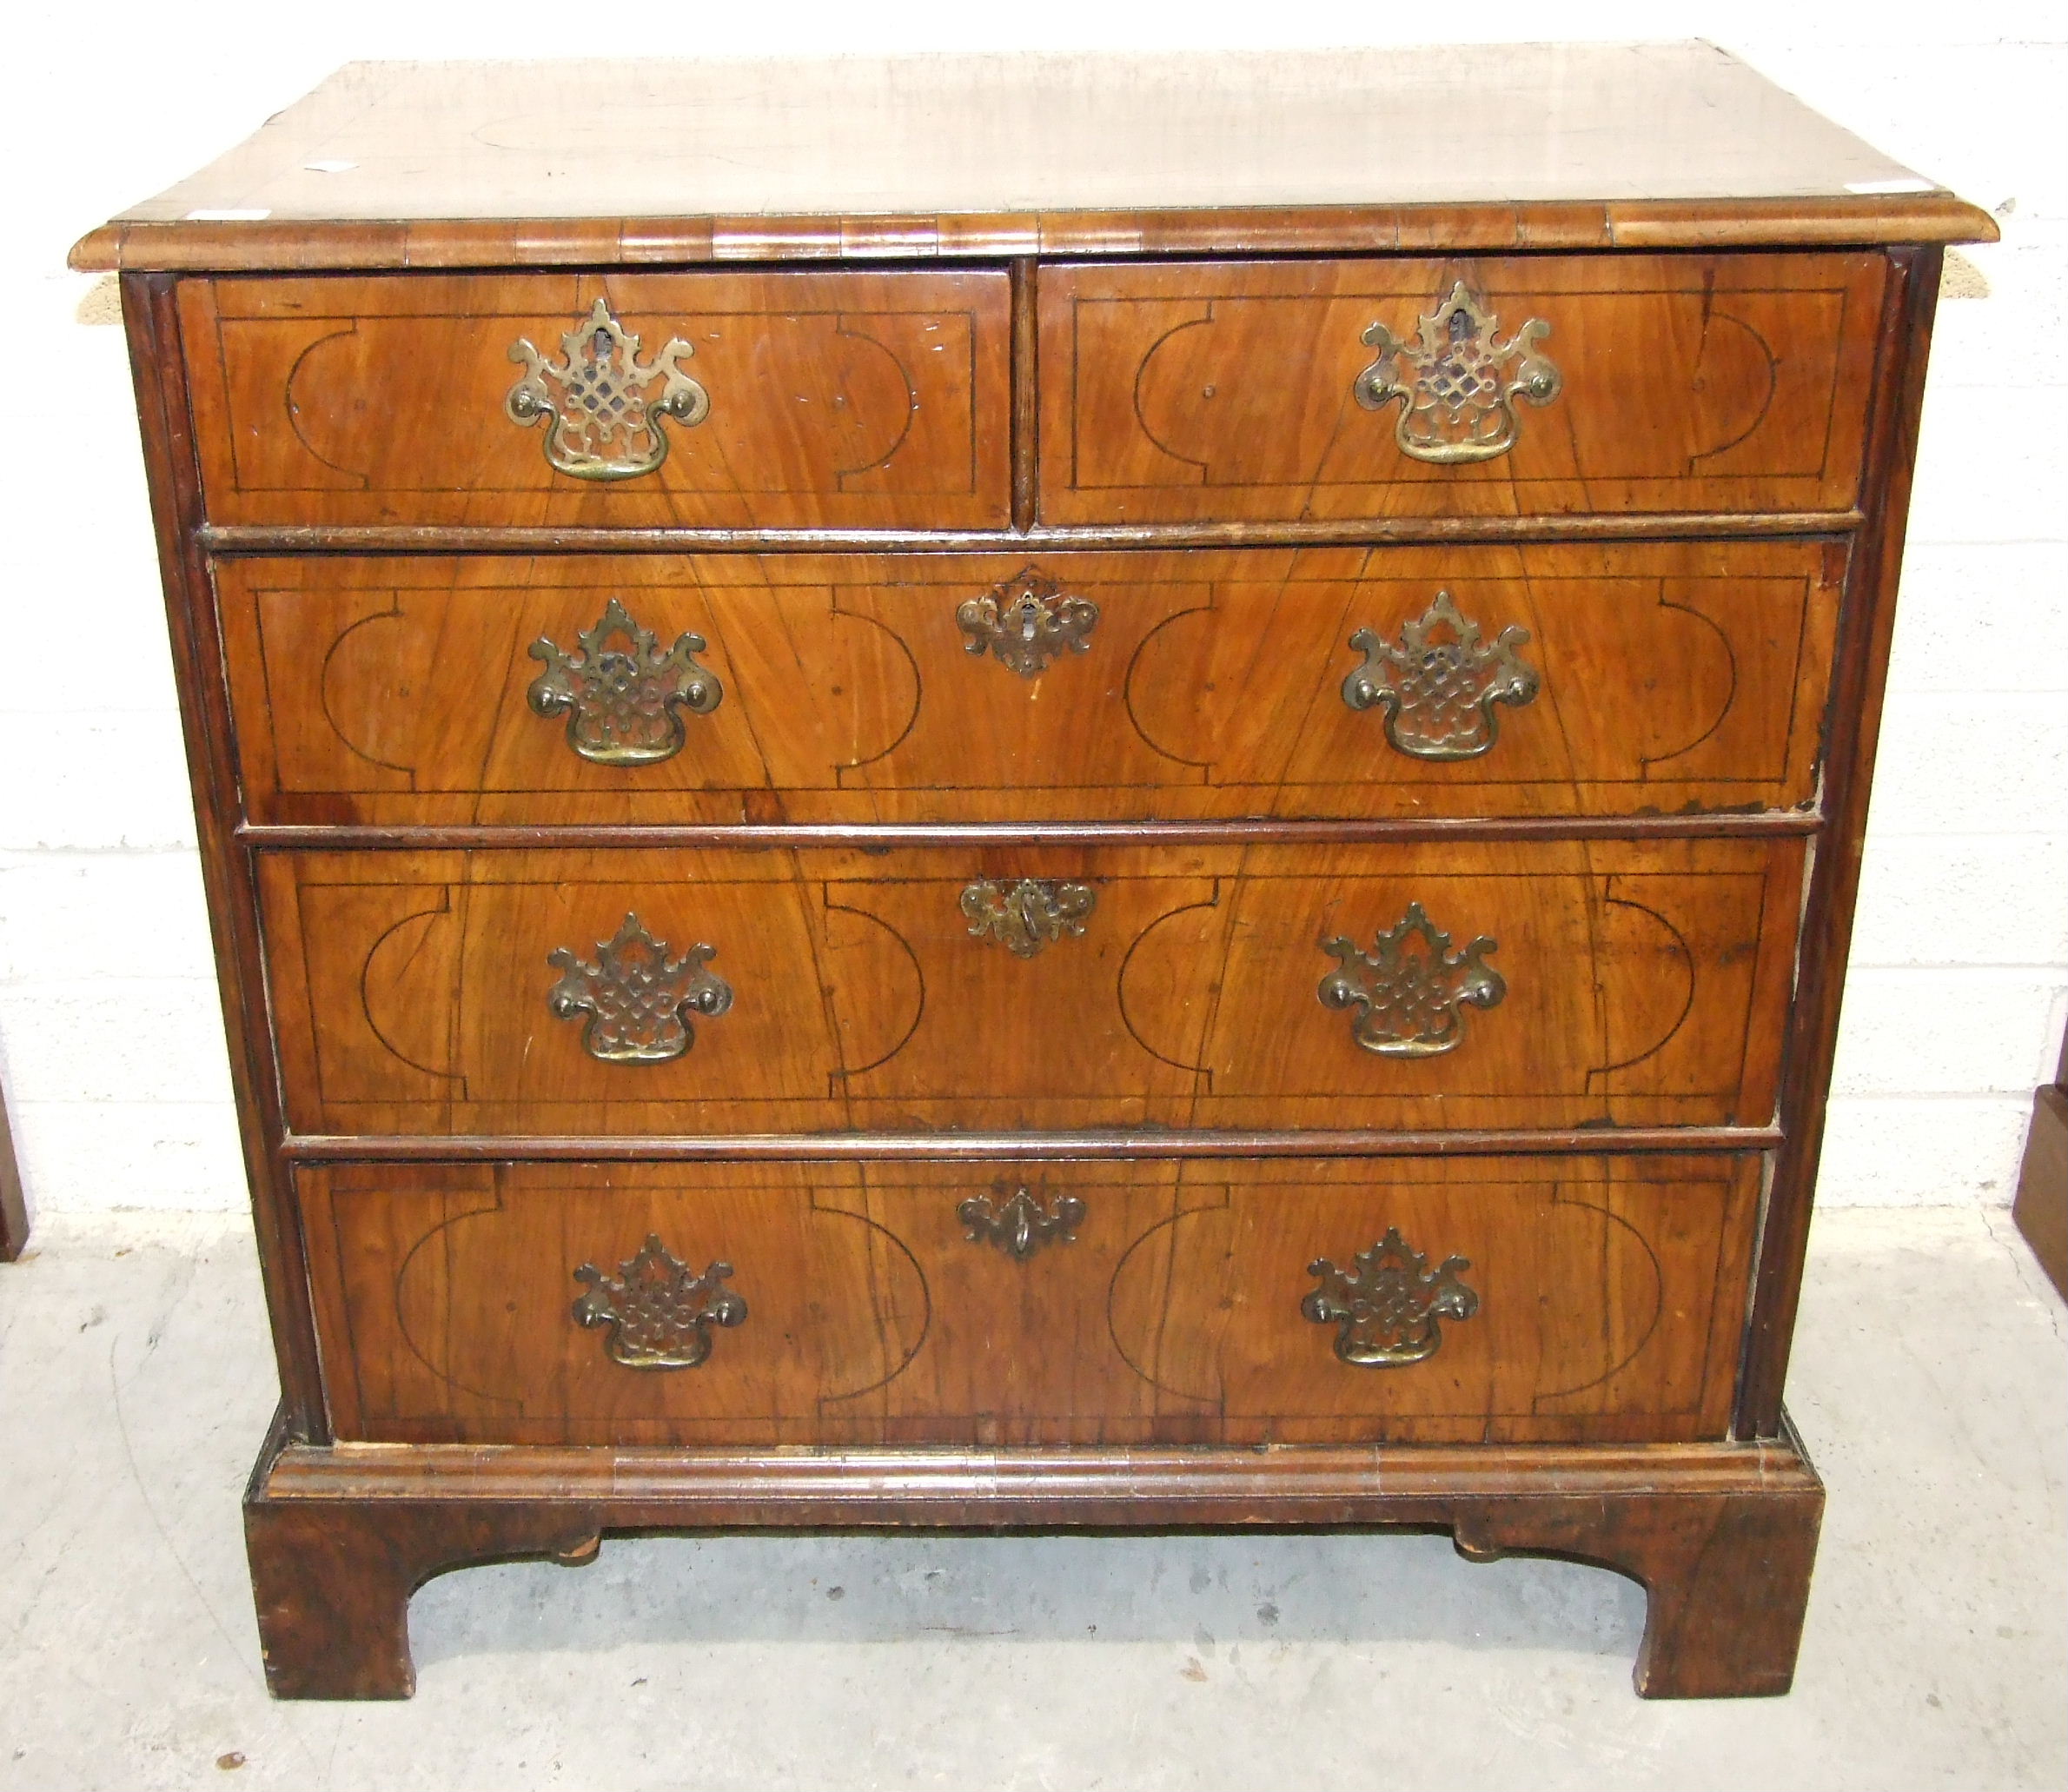 A 17th/18th century inlaid walnut rectangular chest of two short and three long drawers, on